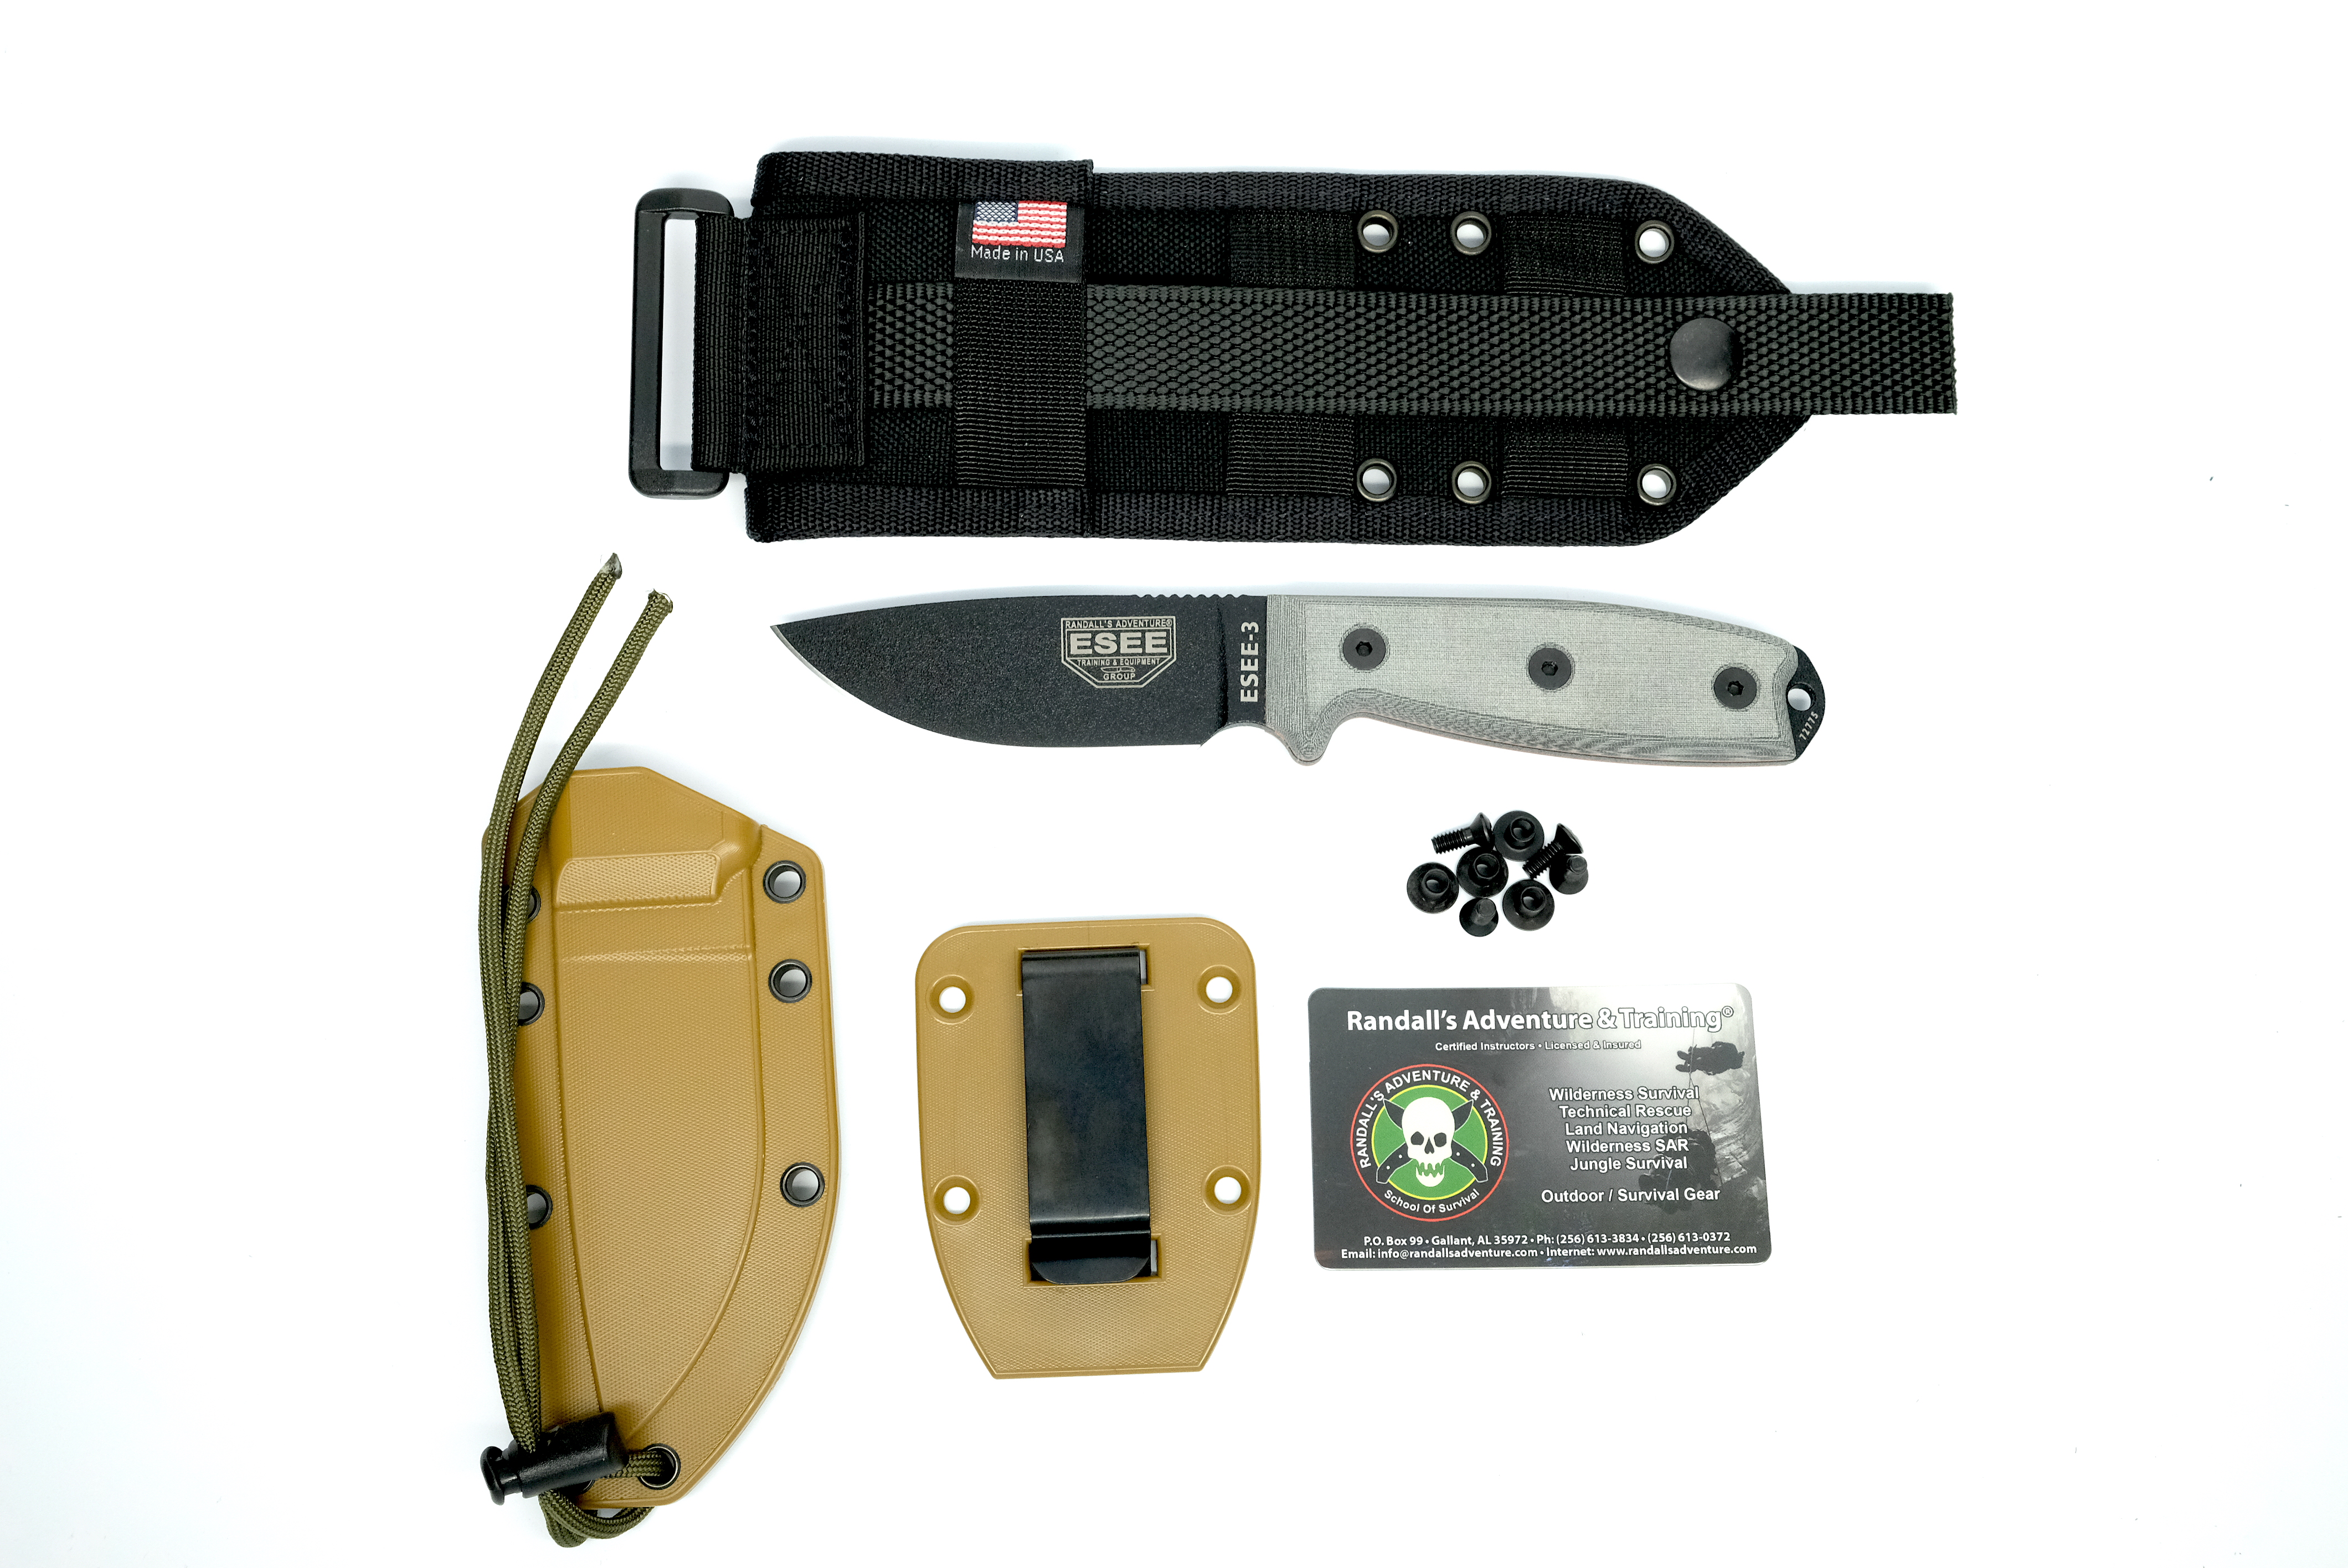 ESEE 3PM-MB Fixed Blade Knife Black 1095 Carbon Steel & Gray G10 w/ MOLLE Sheath Knives